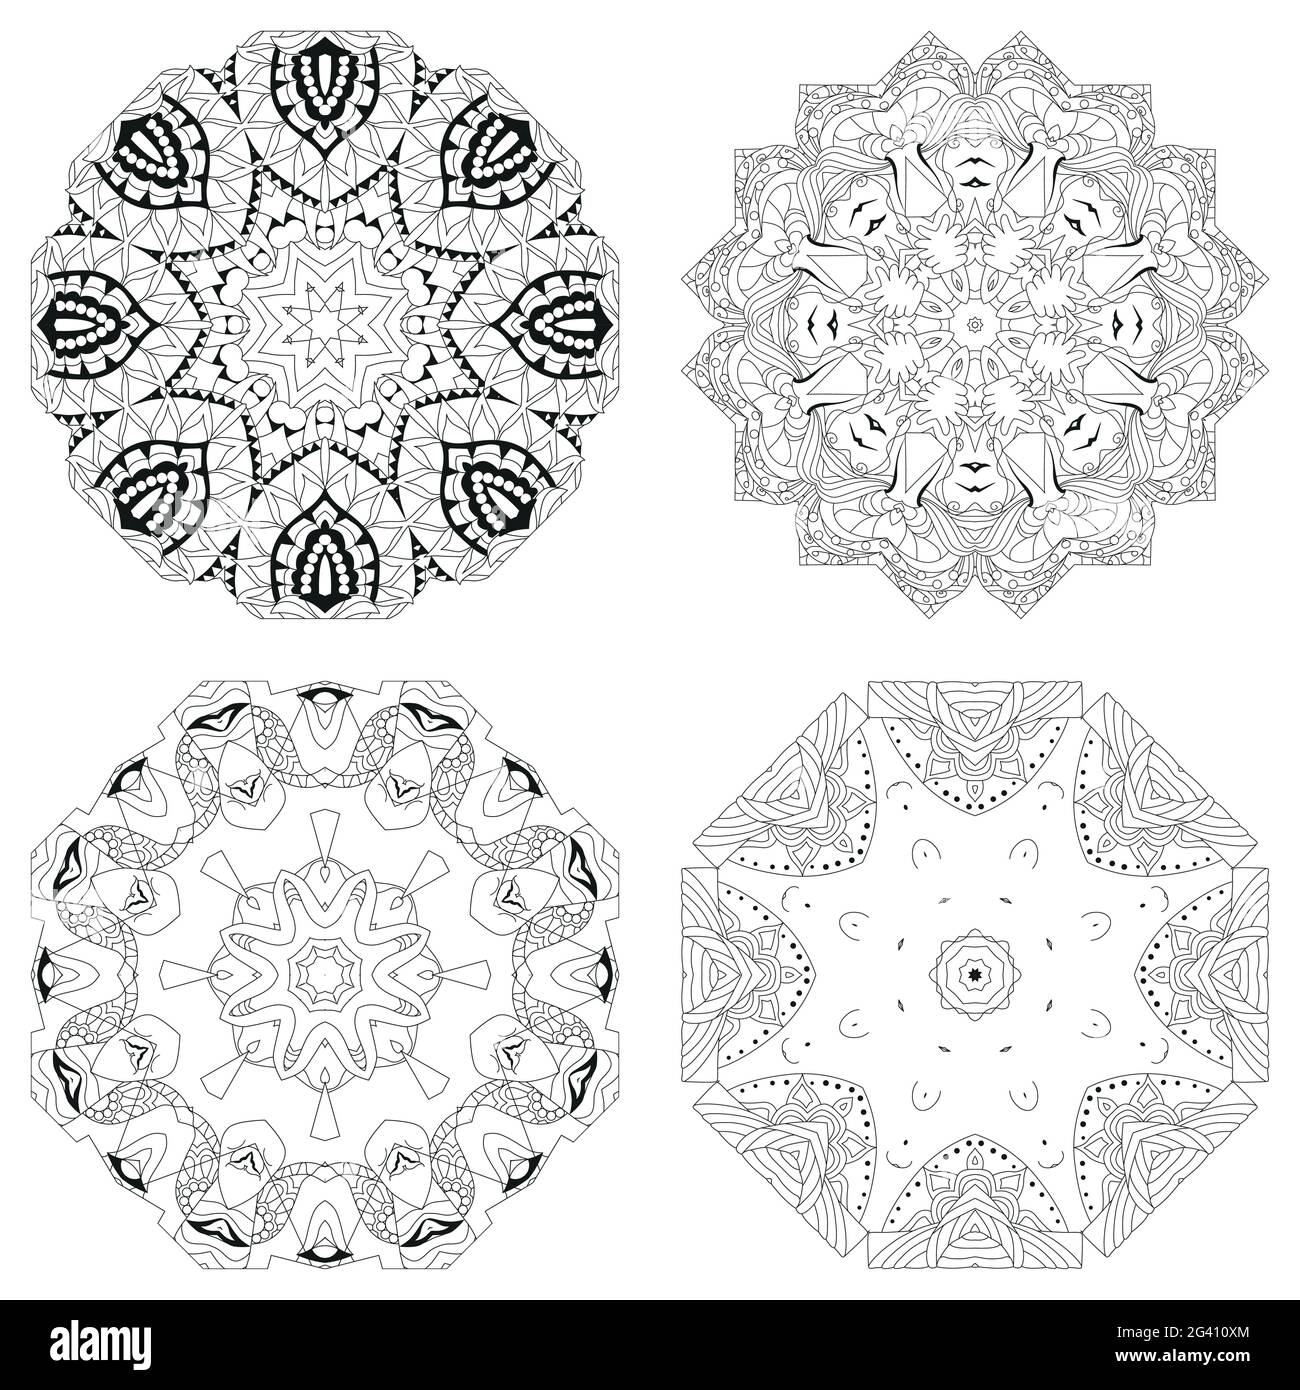 Adult colouring book Black and White Stock Photos & Images - Alamy